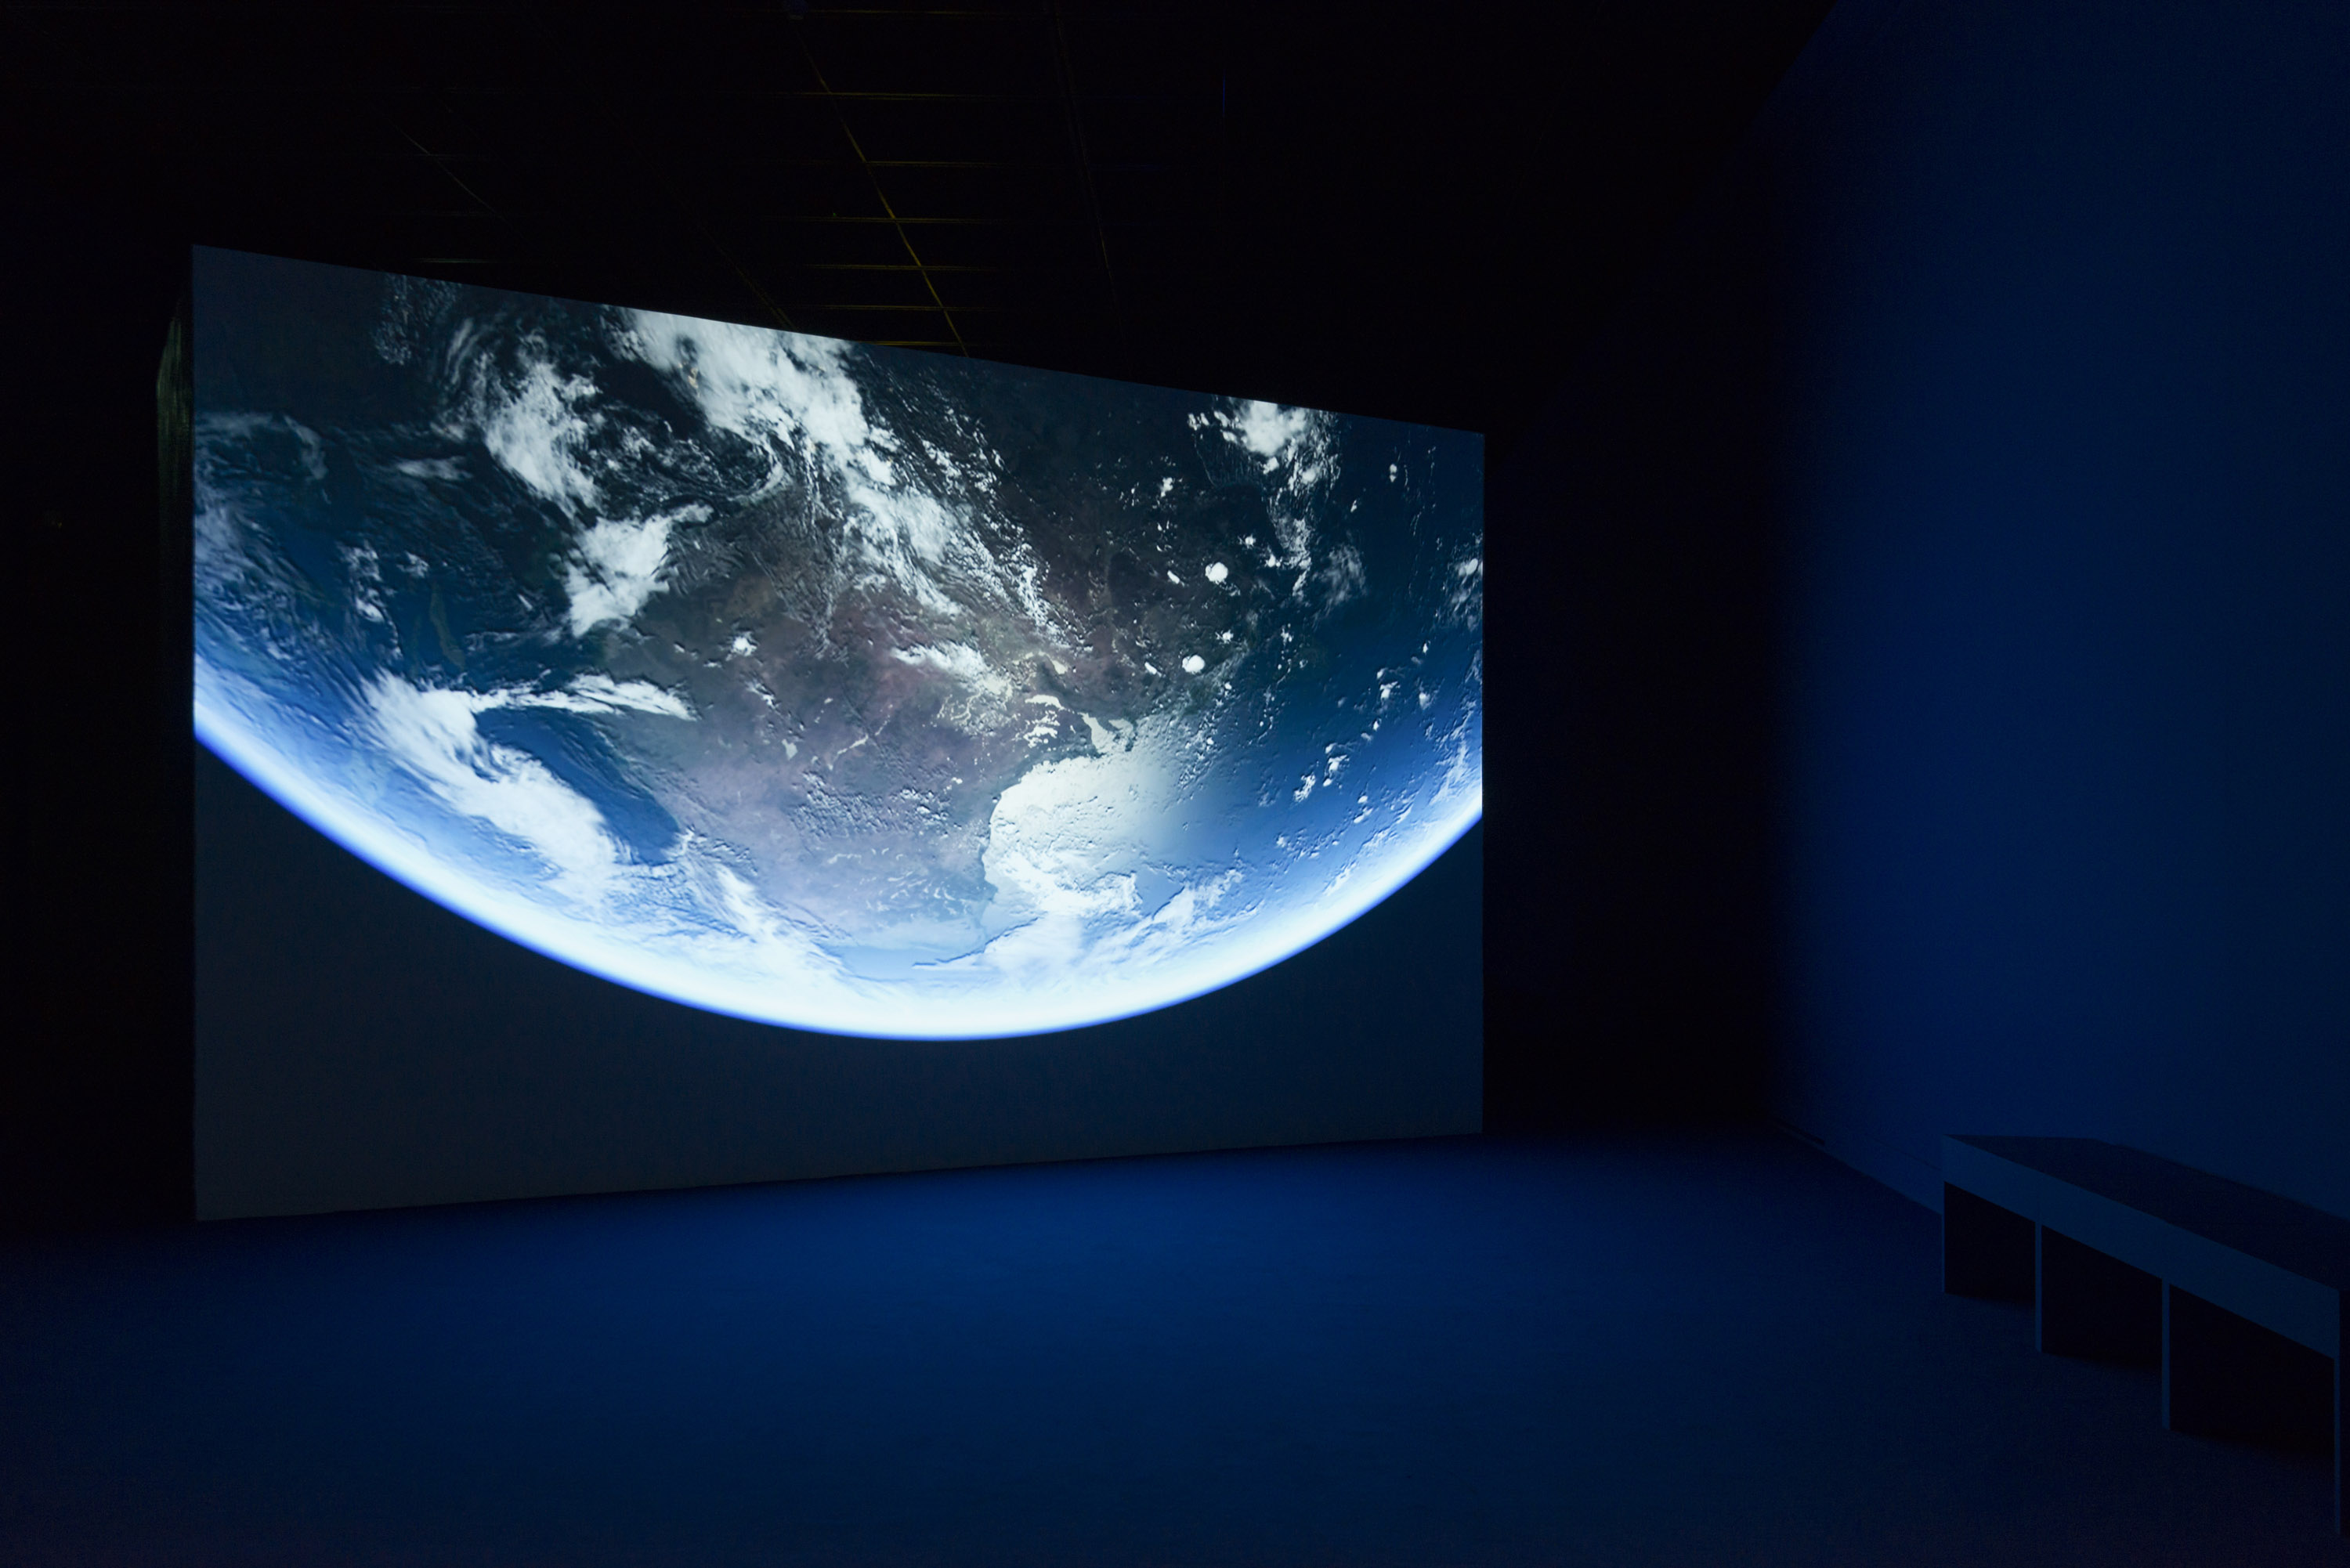 Angelika Markul, “Yonaguni Area,” 2016, video installation, various dimensions. Soundtrack by Simon Ripoll Hurier. On view at CSW Ujadowski Castle, Warsaw. Image courtesy of the artist. 